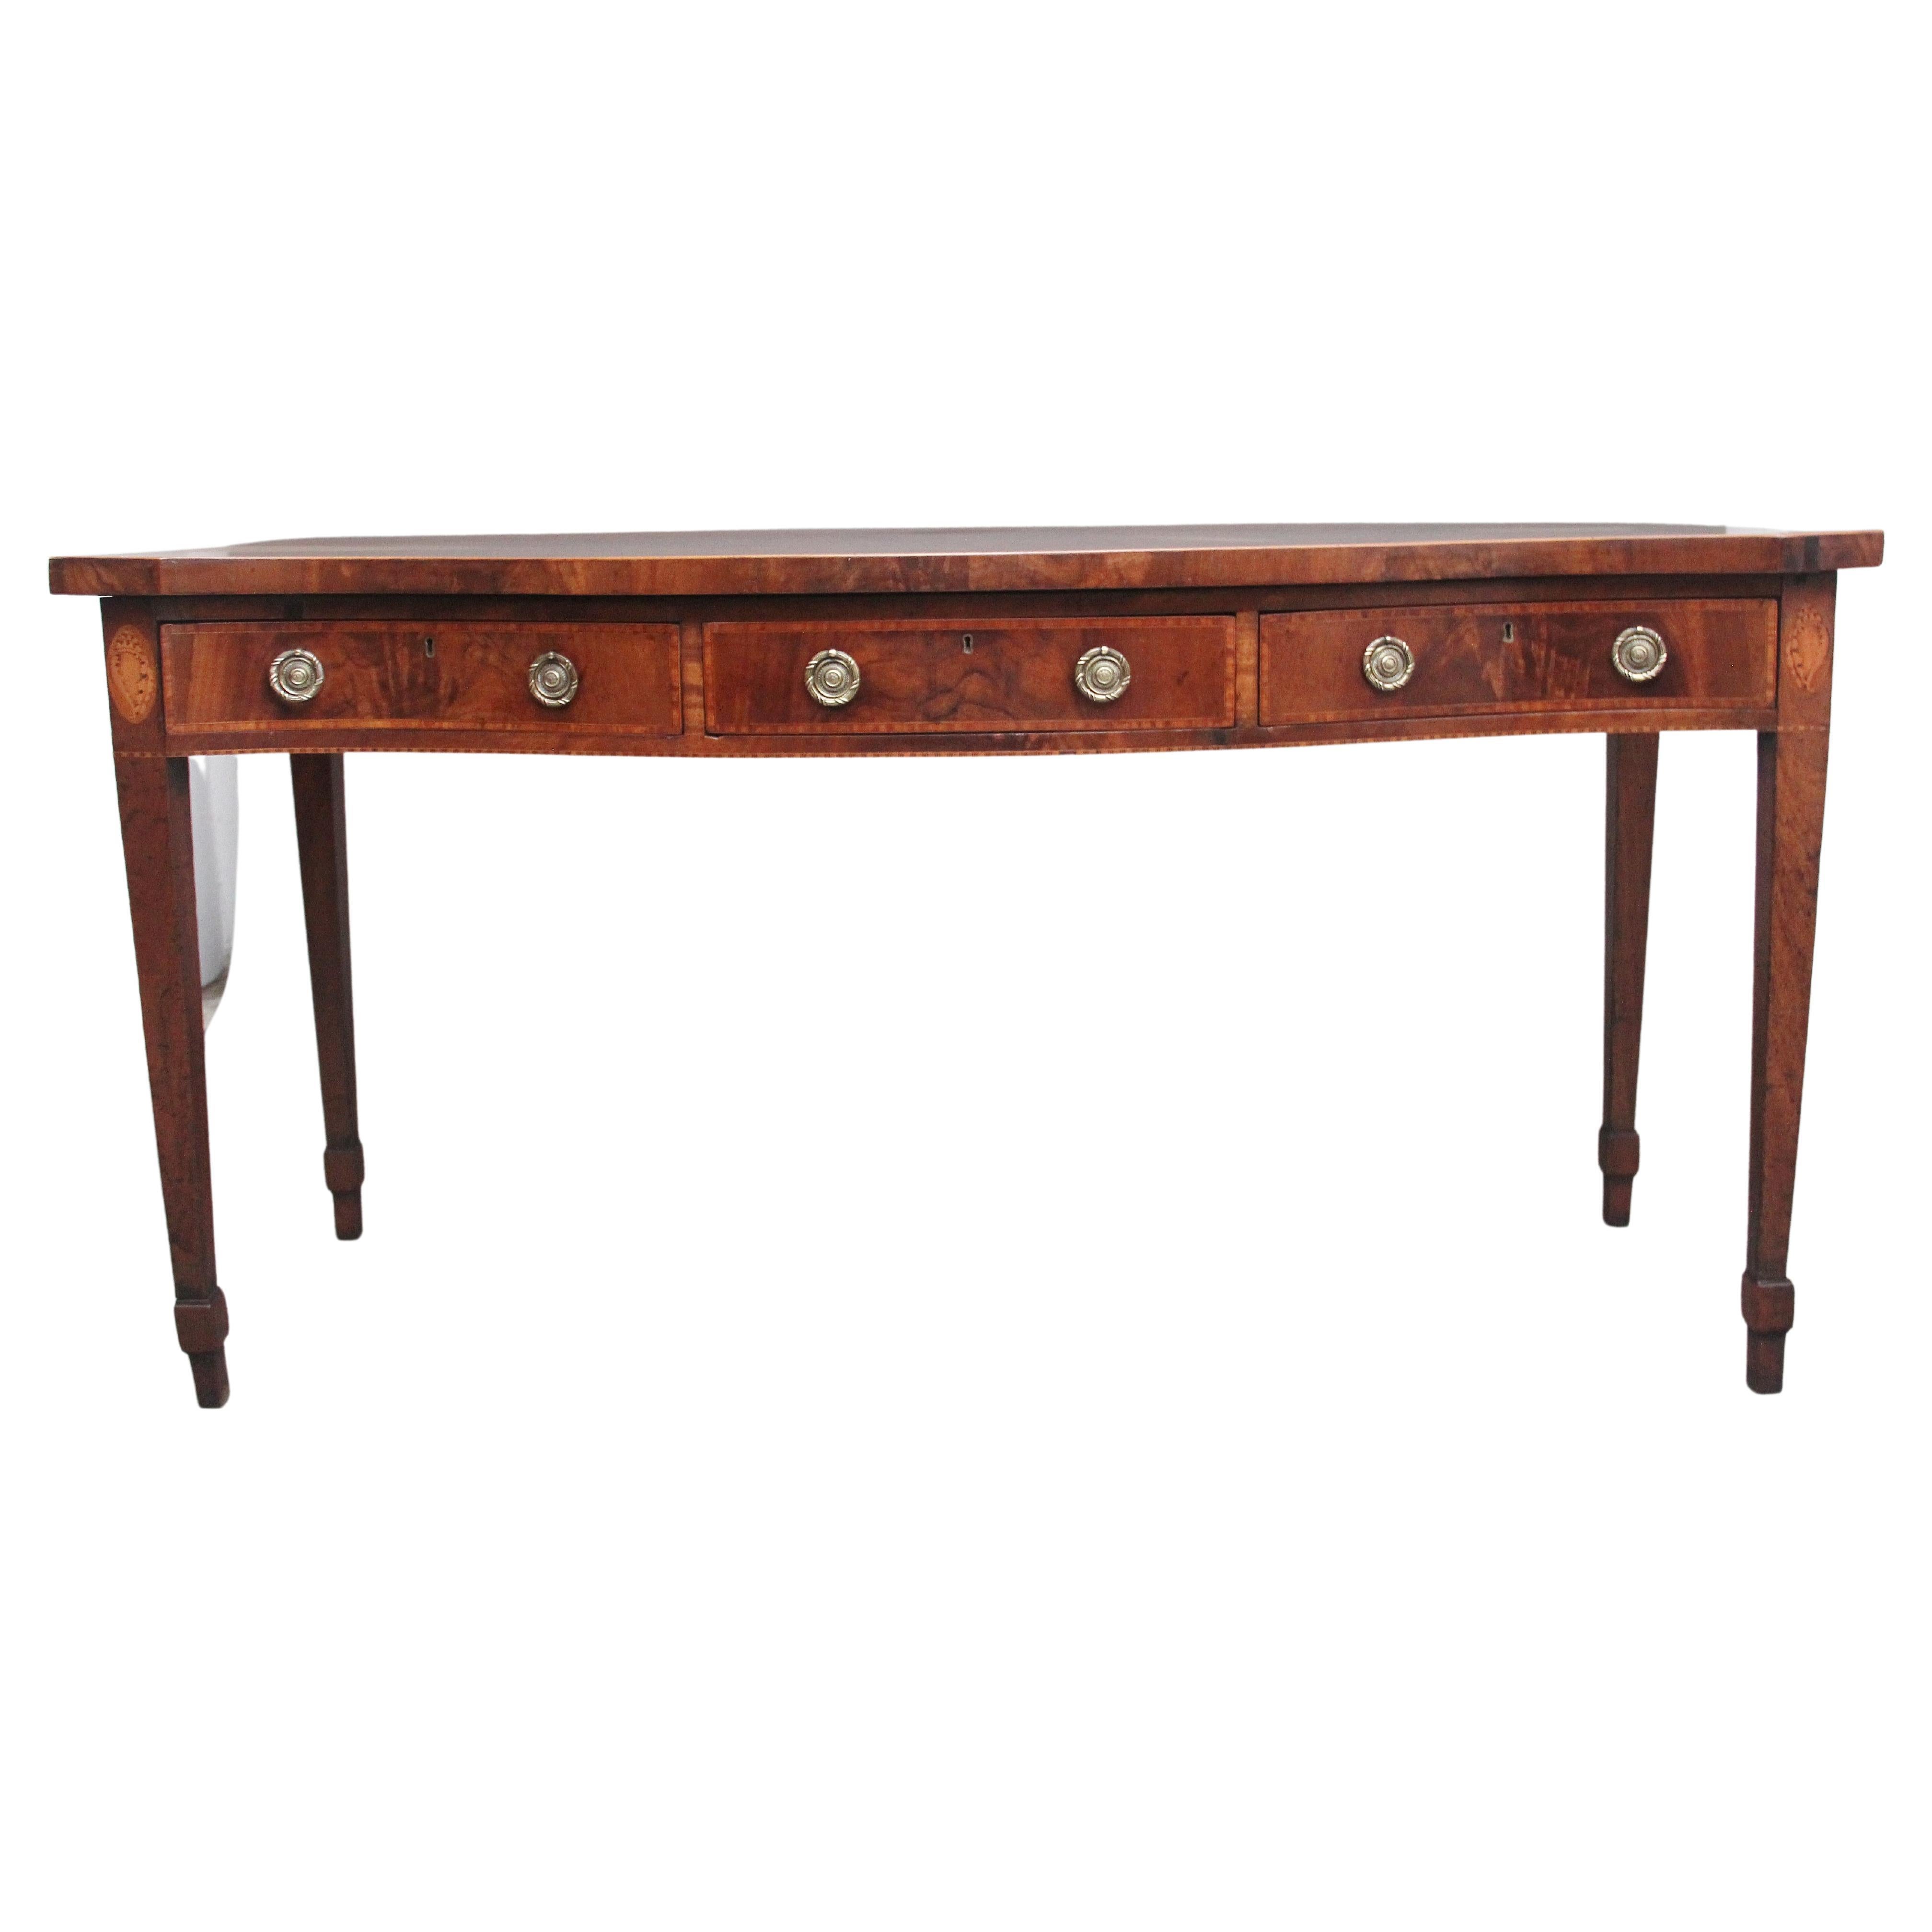 Superb Quality Early 19th Century Mahogany Serpentine Serving Table